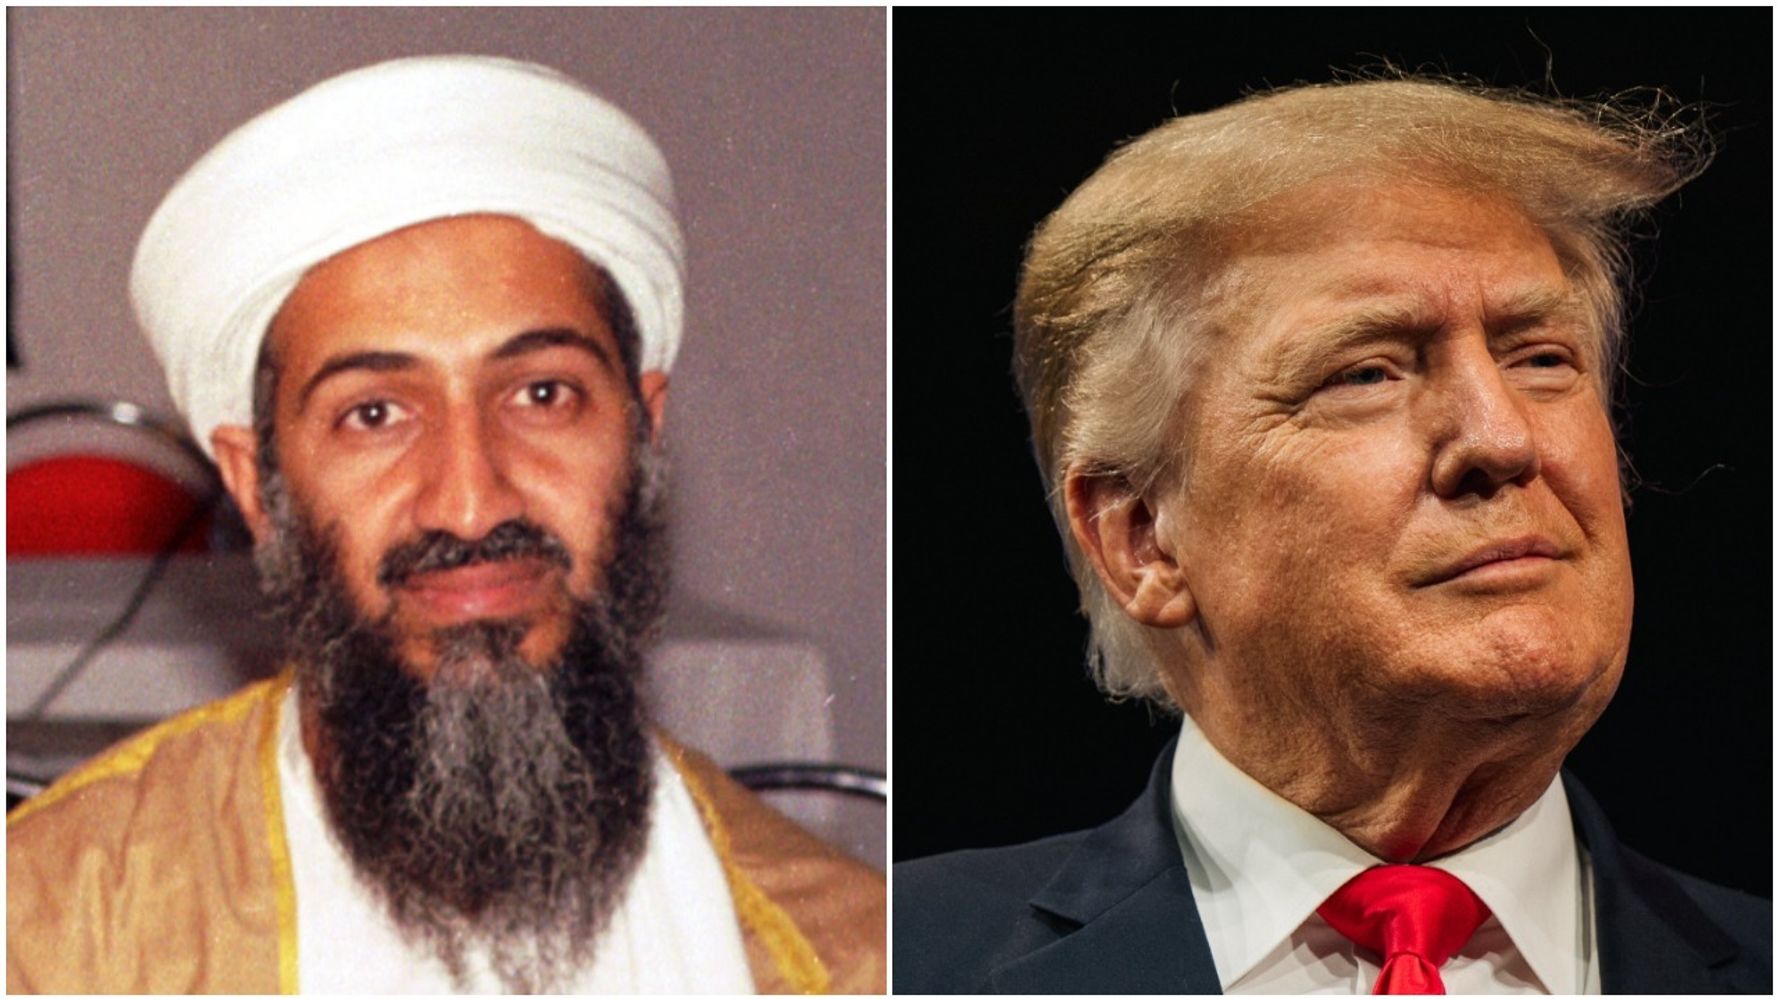 Trump Suggests Osama Bin Laden Wasn't That Big A Deal, Says He Only Had 'One Hit'